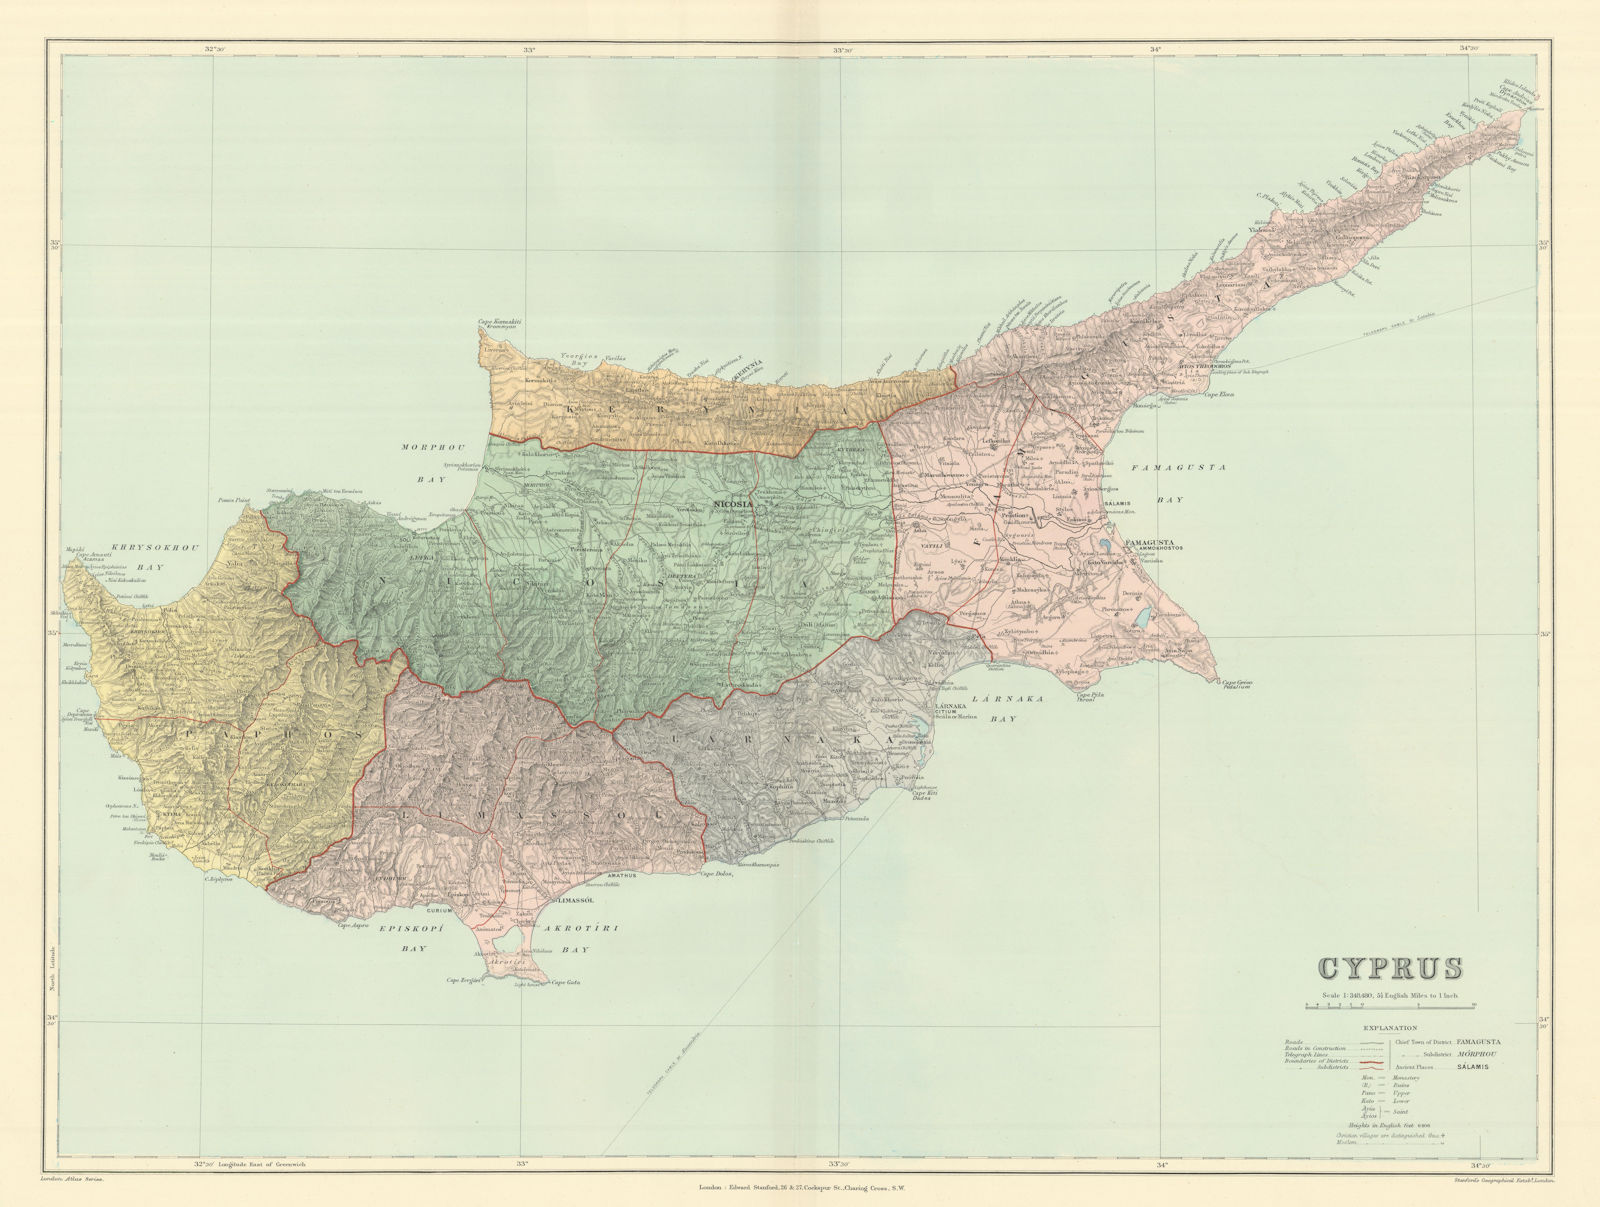 Cyprus. Districts. Ancient sites. Large 51x66cm. STANFORD 1894 old antique map